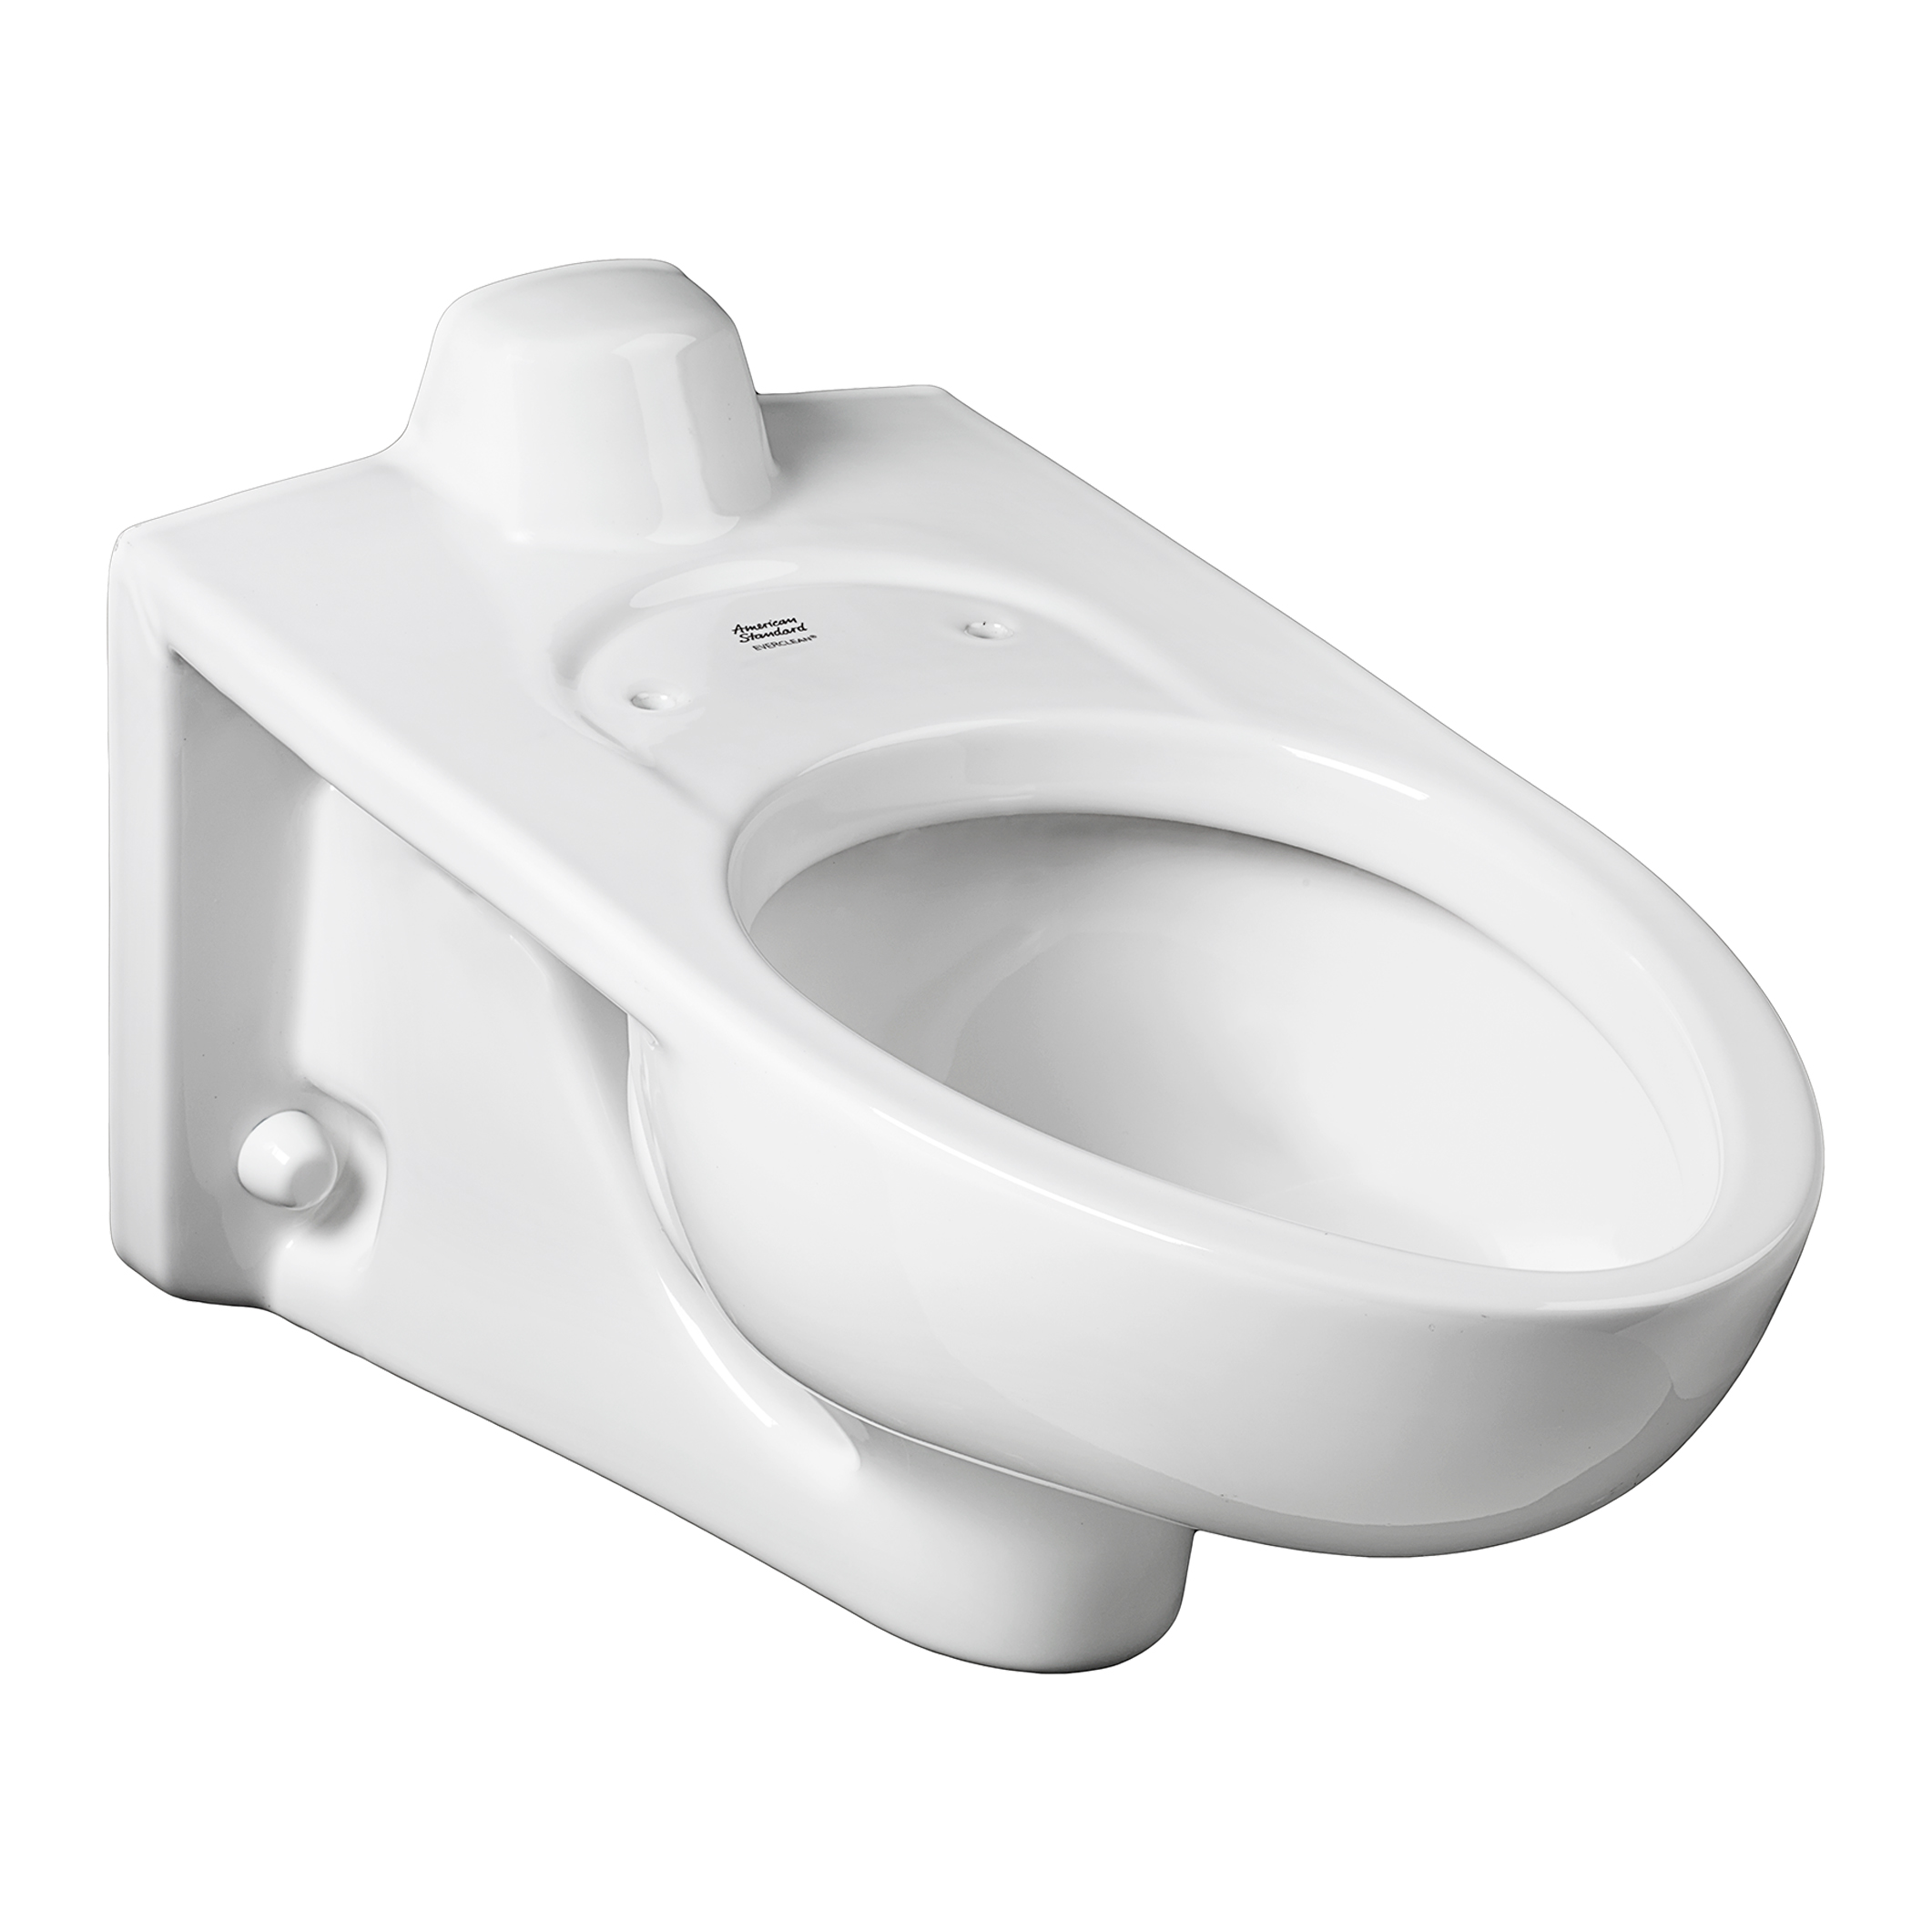 Afwall Millenium Wall Hung Elongated Toilet in White